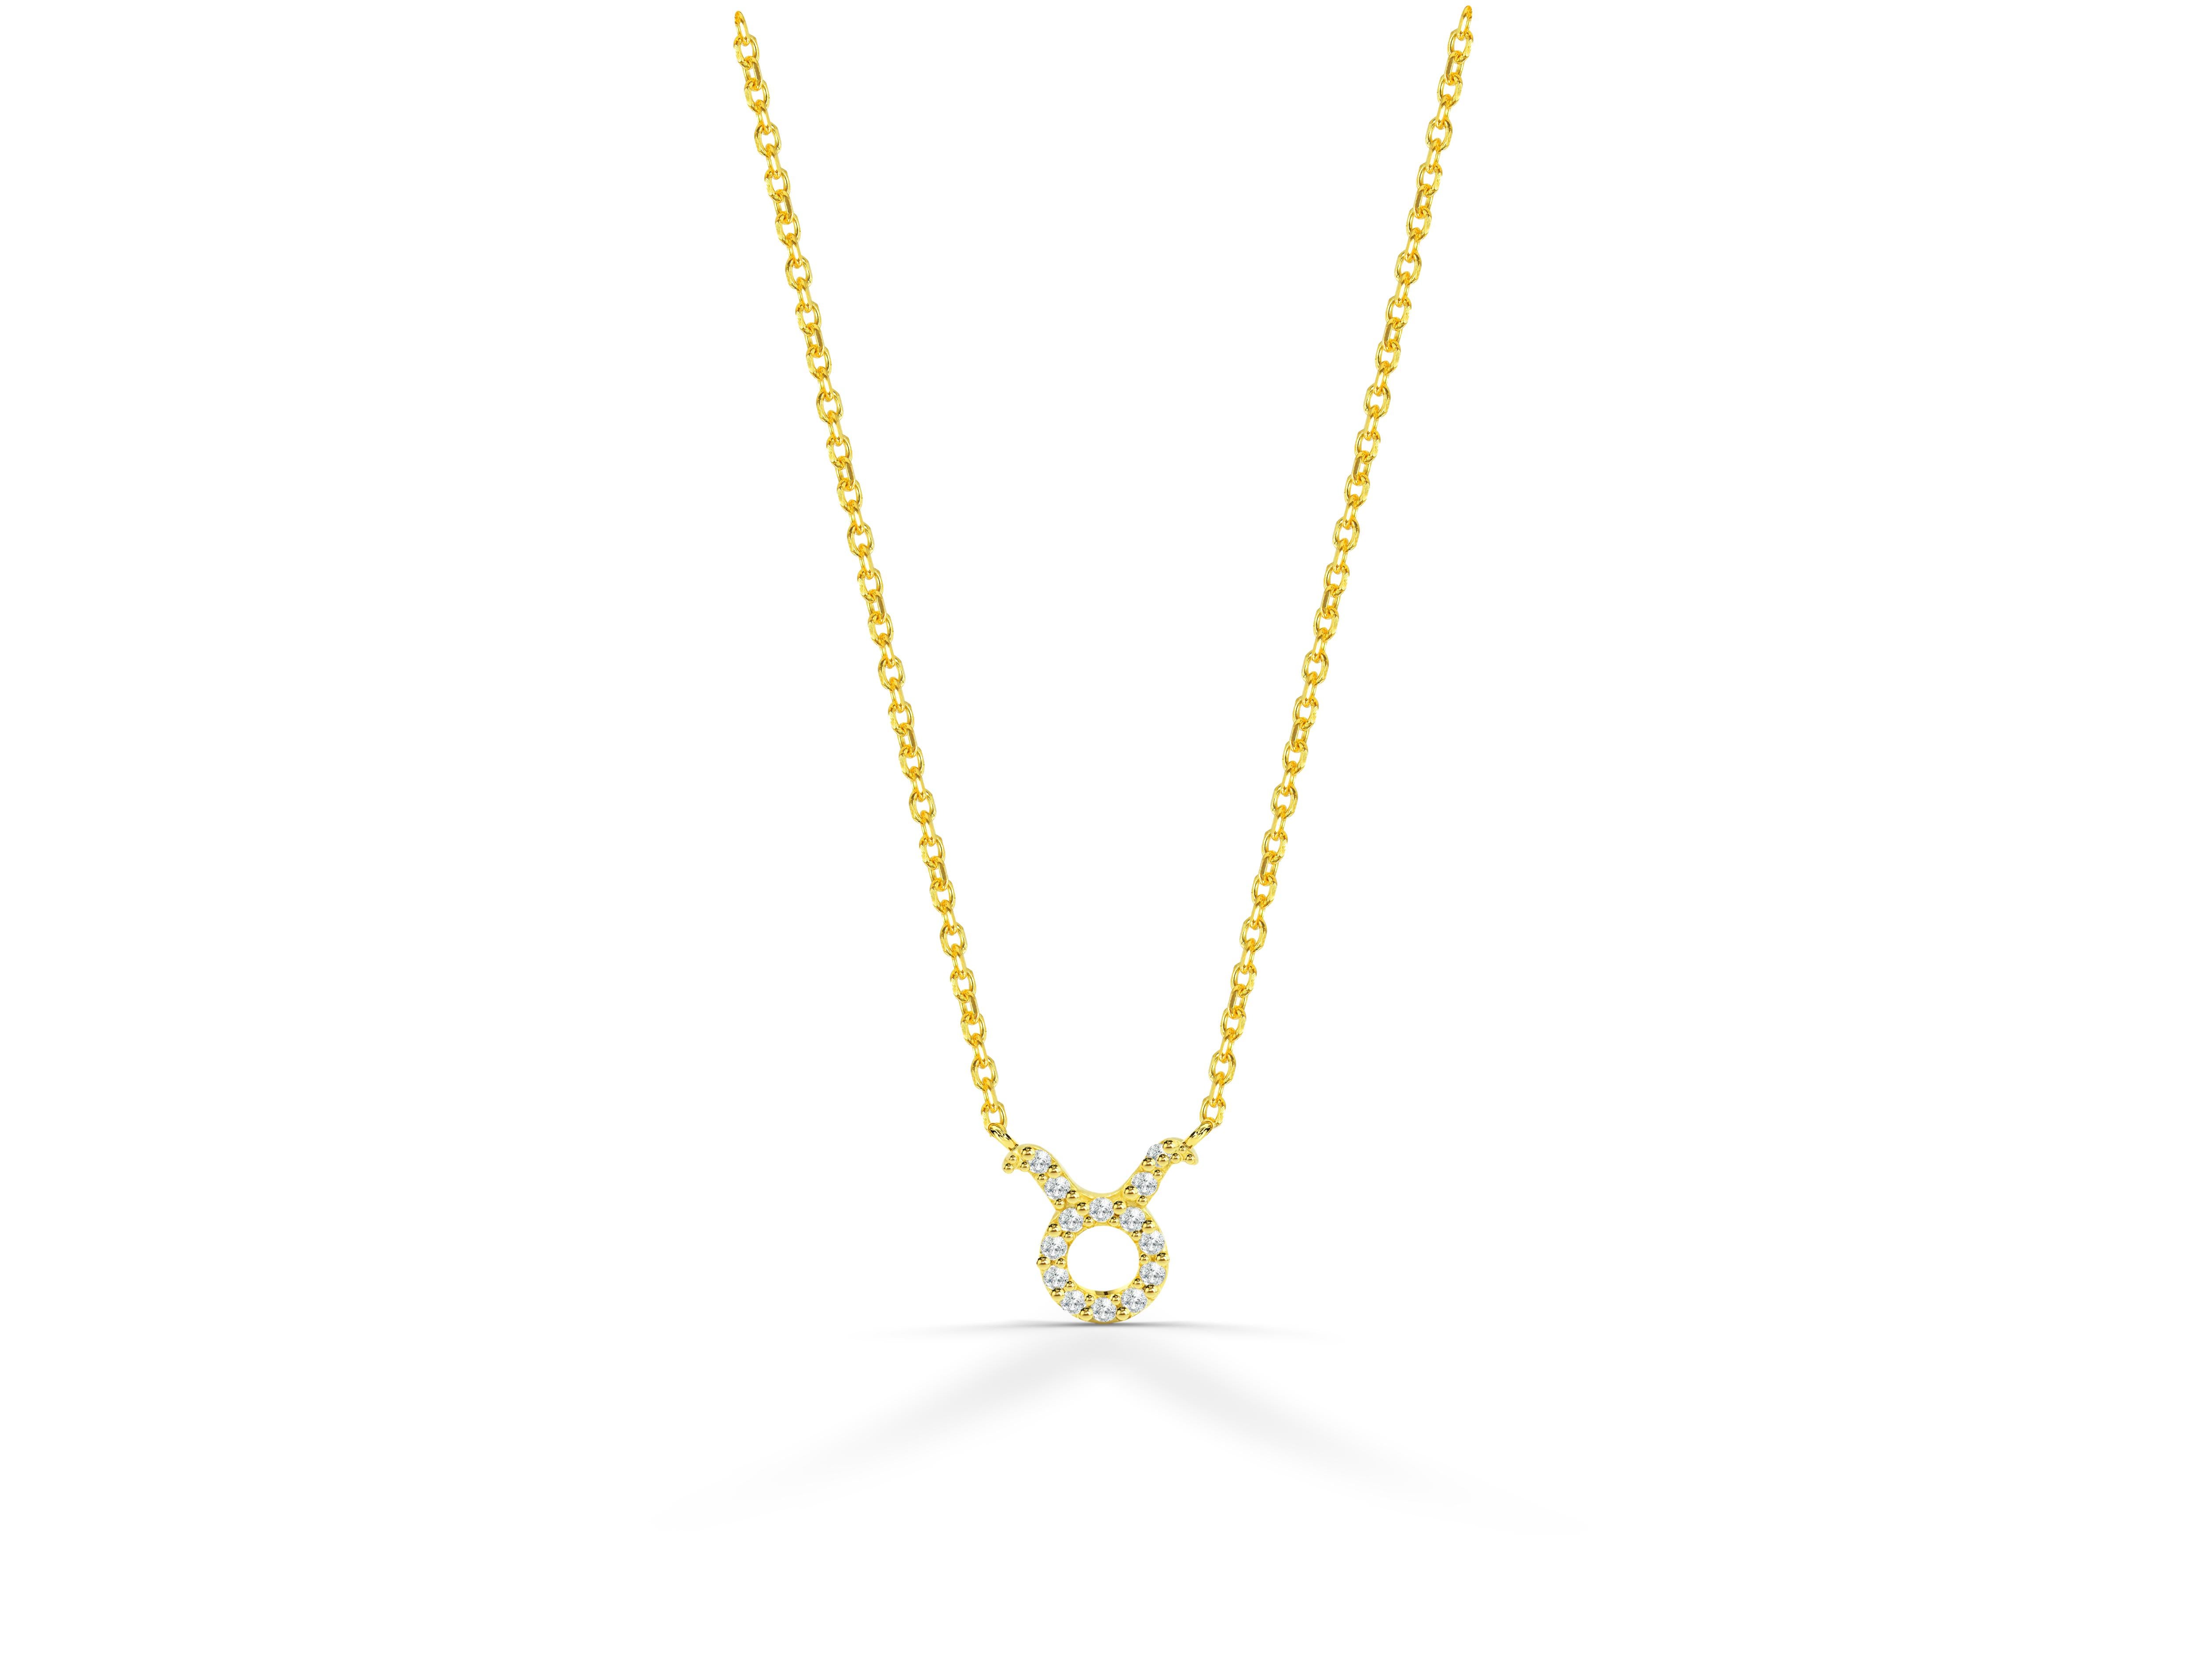 Beautiful and Sparkly Diamond Taurus Necklace made of 18k solid gold available in three colors, Yellow Gold / Rose Gold / White Gold.

Natural genuine round cut diamond each diamond is hand selected by me to ensure quality and set by a master setter